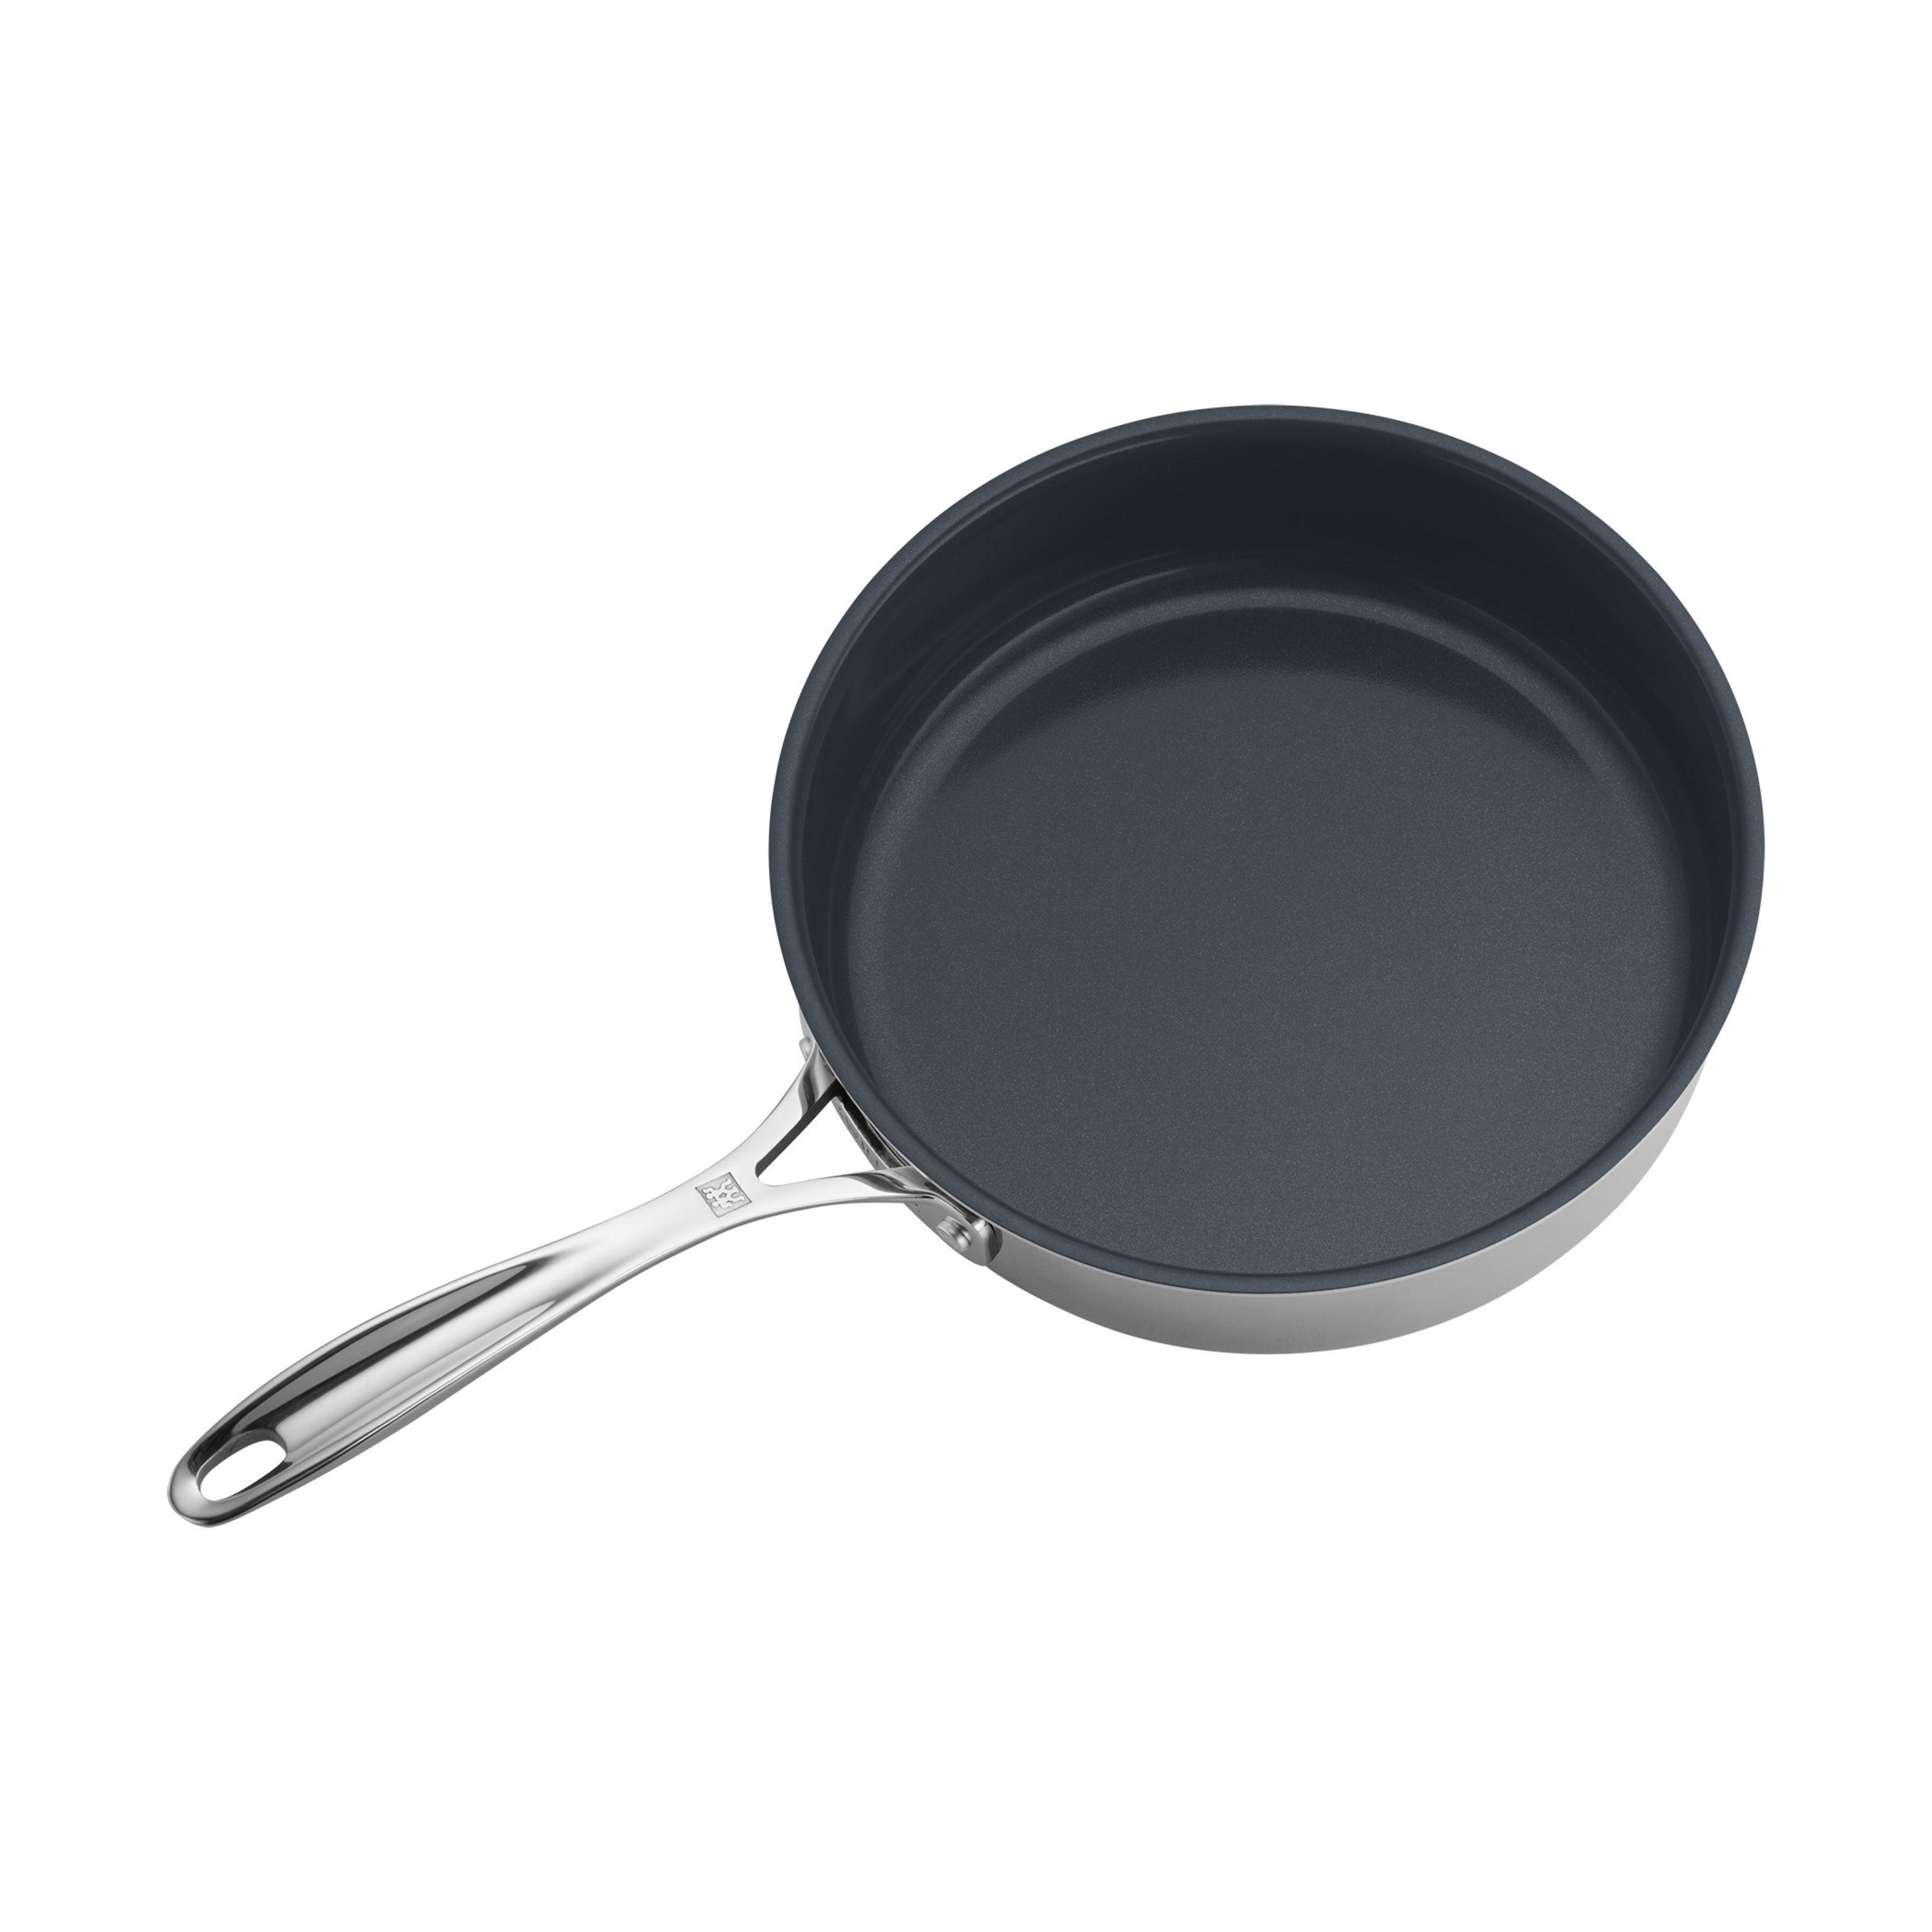 ZWILLING Clad CFX 9.5-inch, Non-stick, Stainless Steel Ceramic Sauté Pan